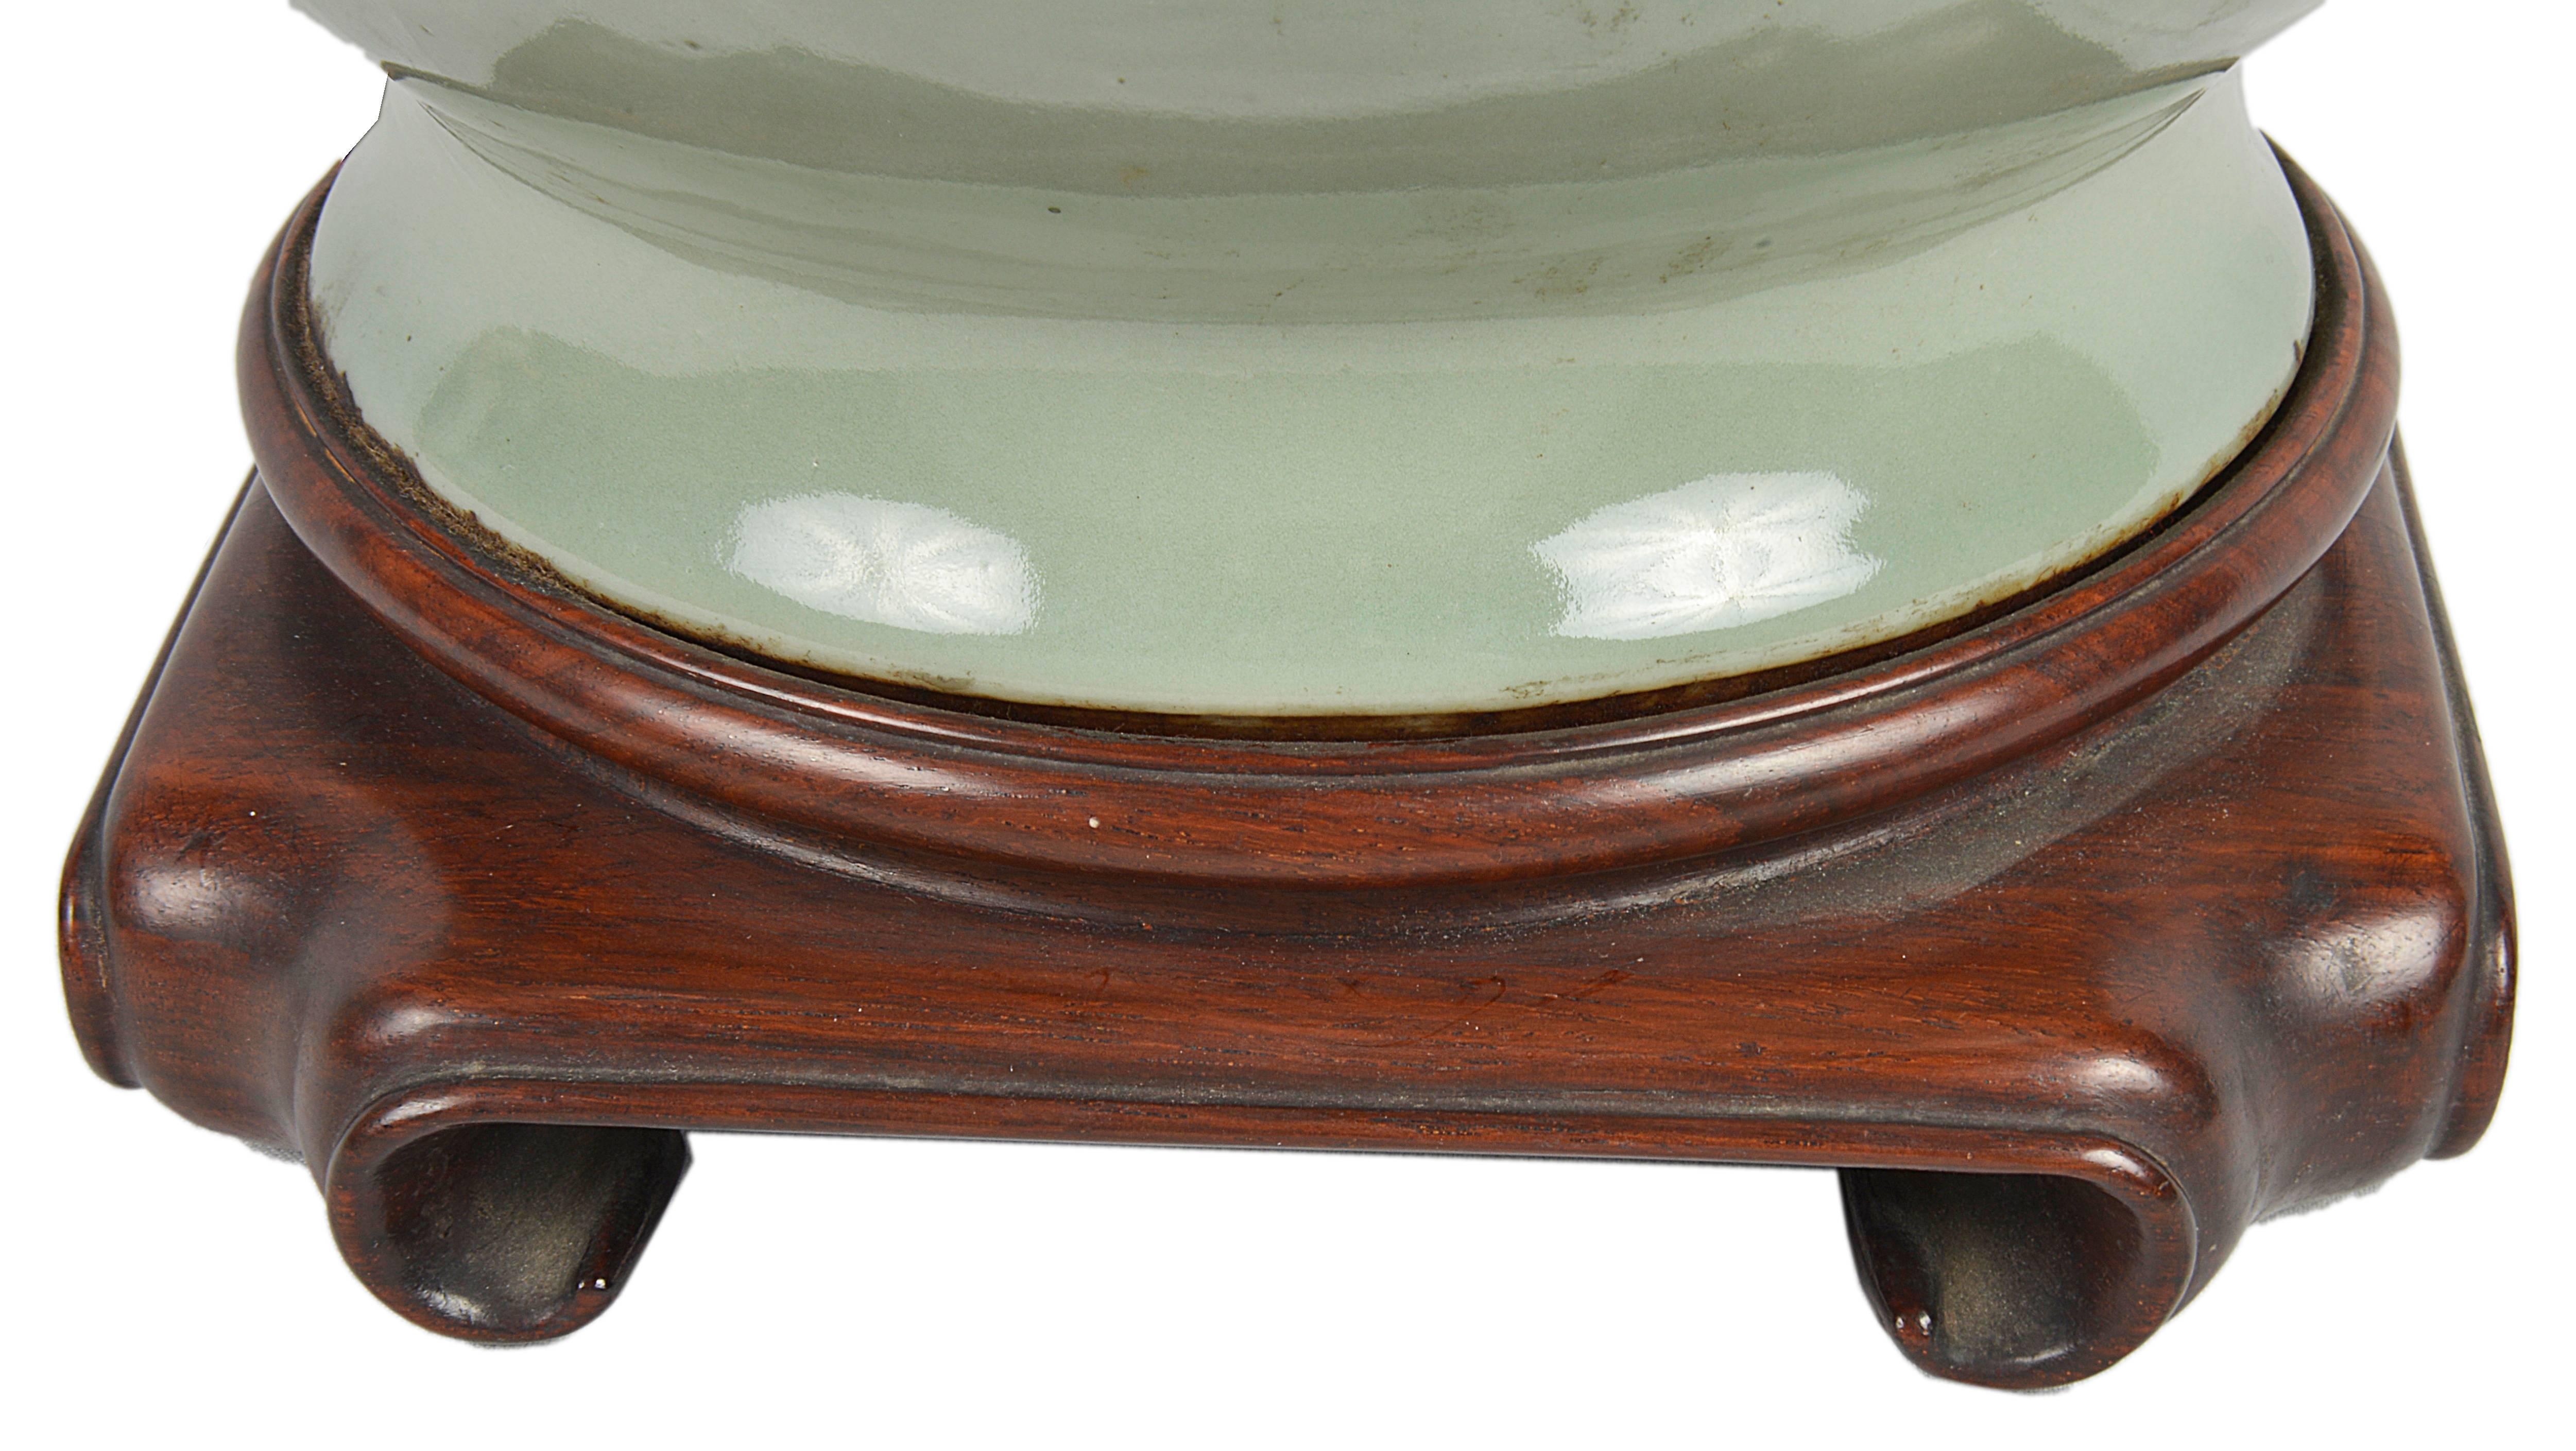 A very stylish 19th century, Chinese Celadon porcelain bulbous shape vase, having mythical creator handles with rings. Mounted on a Chinese hardwood stand.